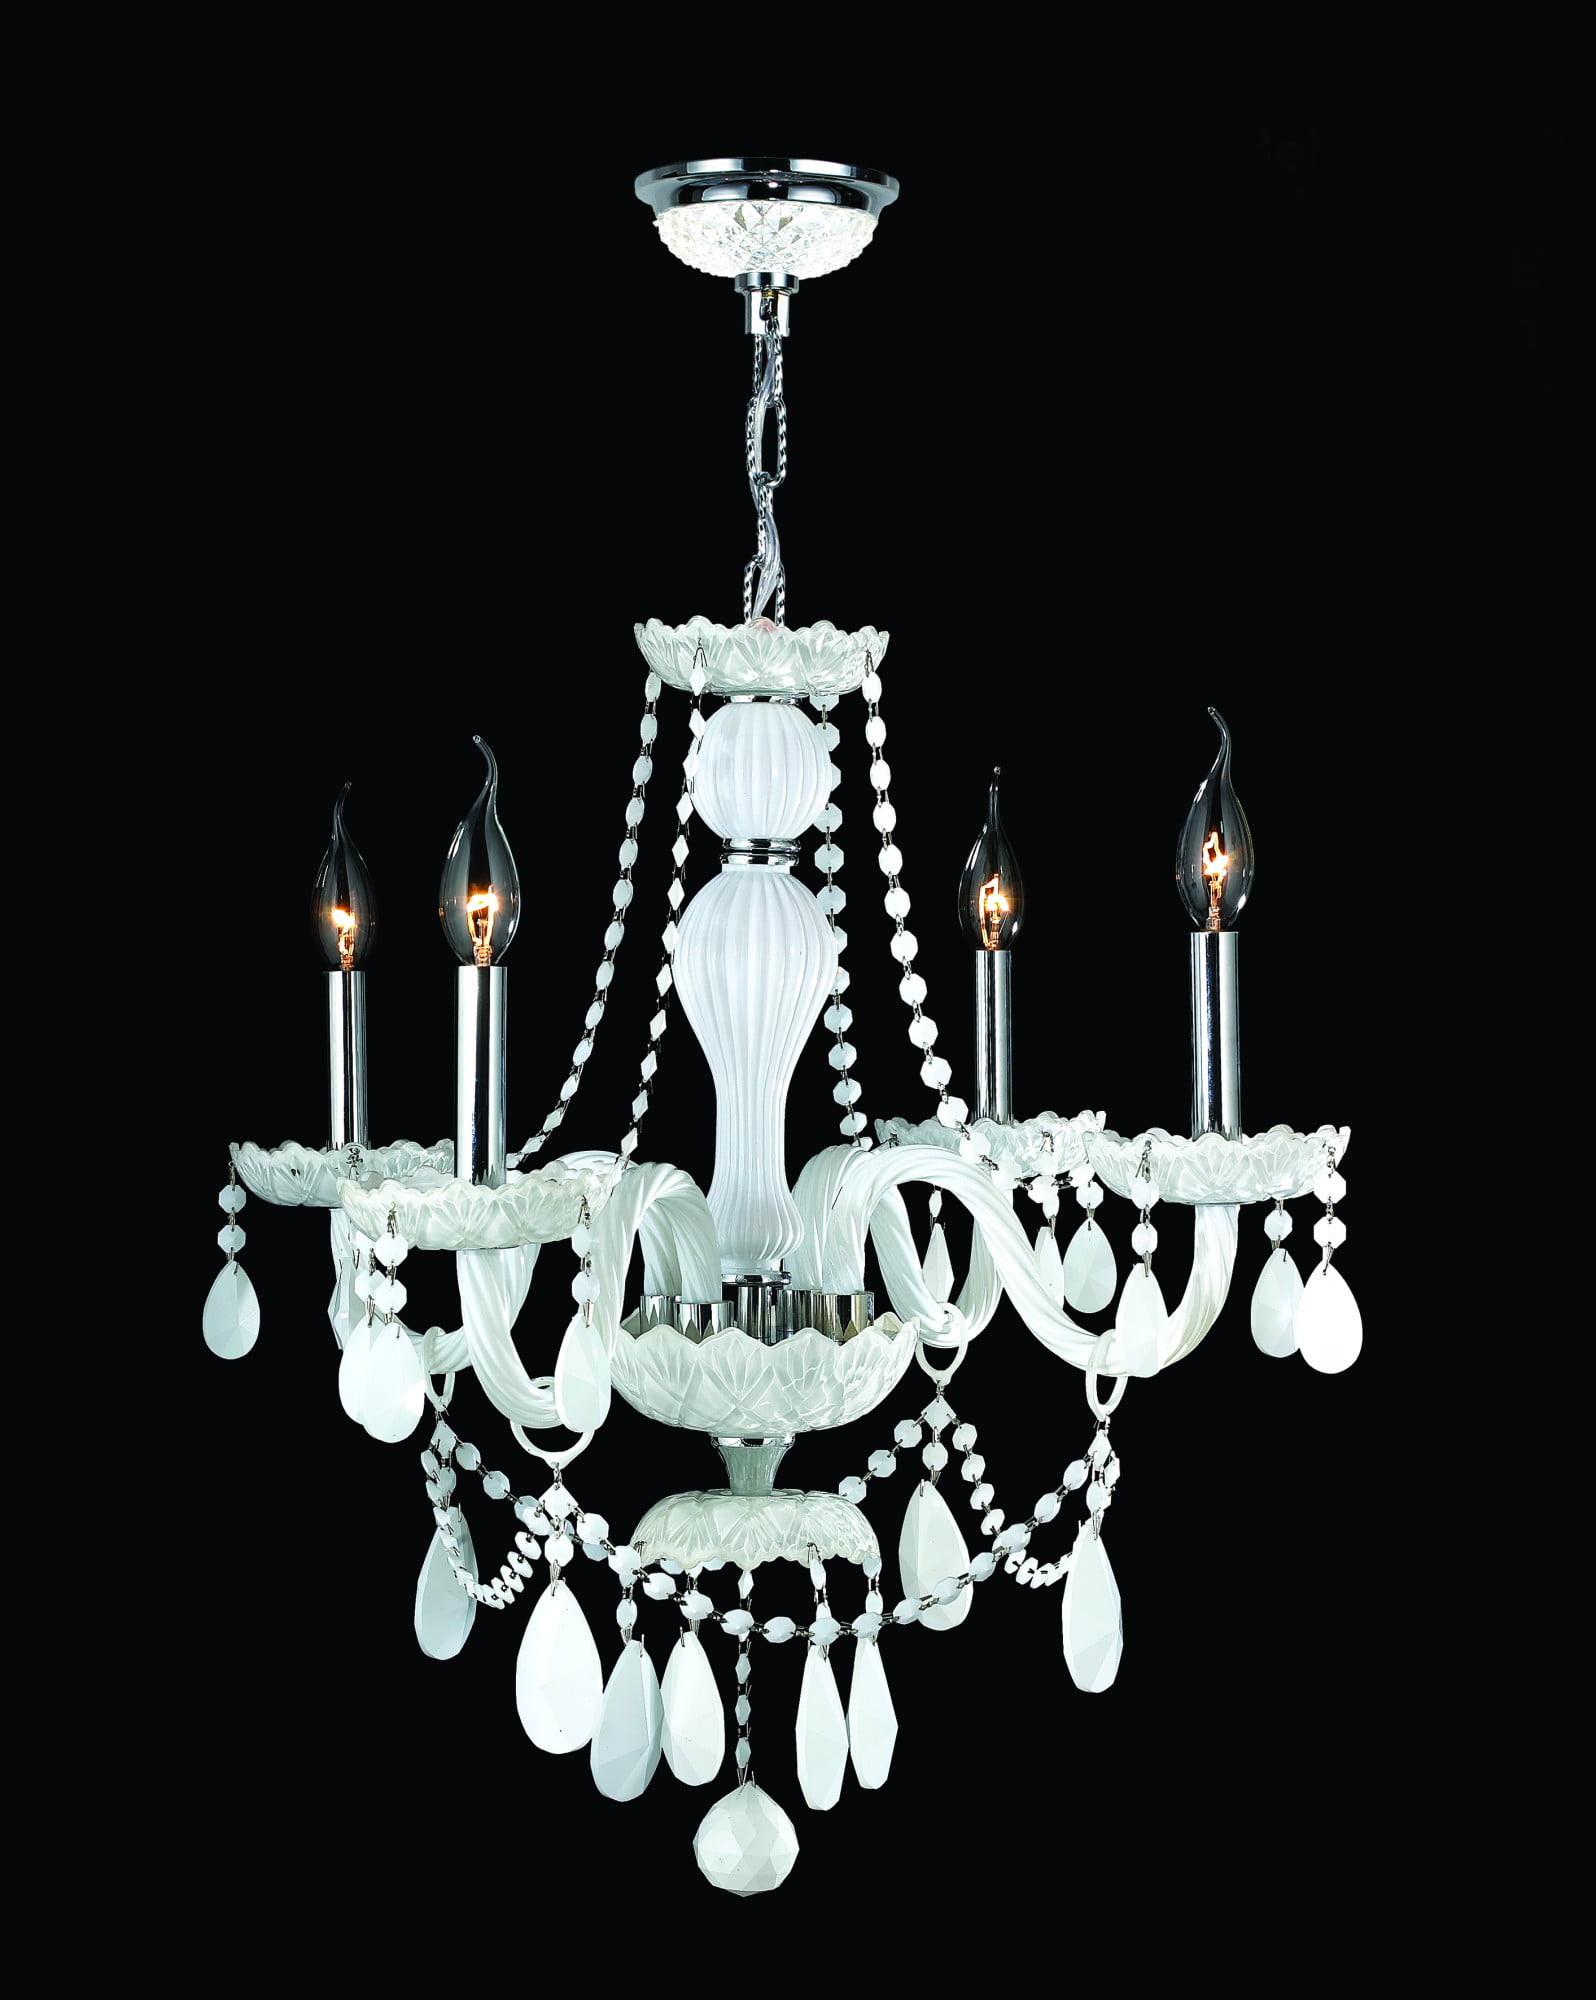 Provence Collection 4 Light Chrome Finish and White Crystal Chandelier 23" D x 25" H Medium